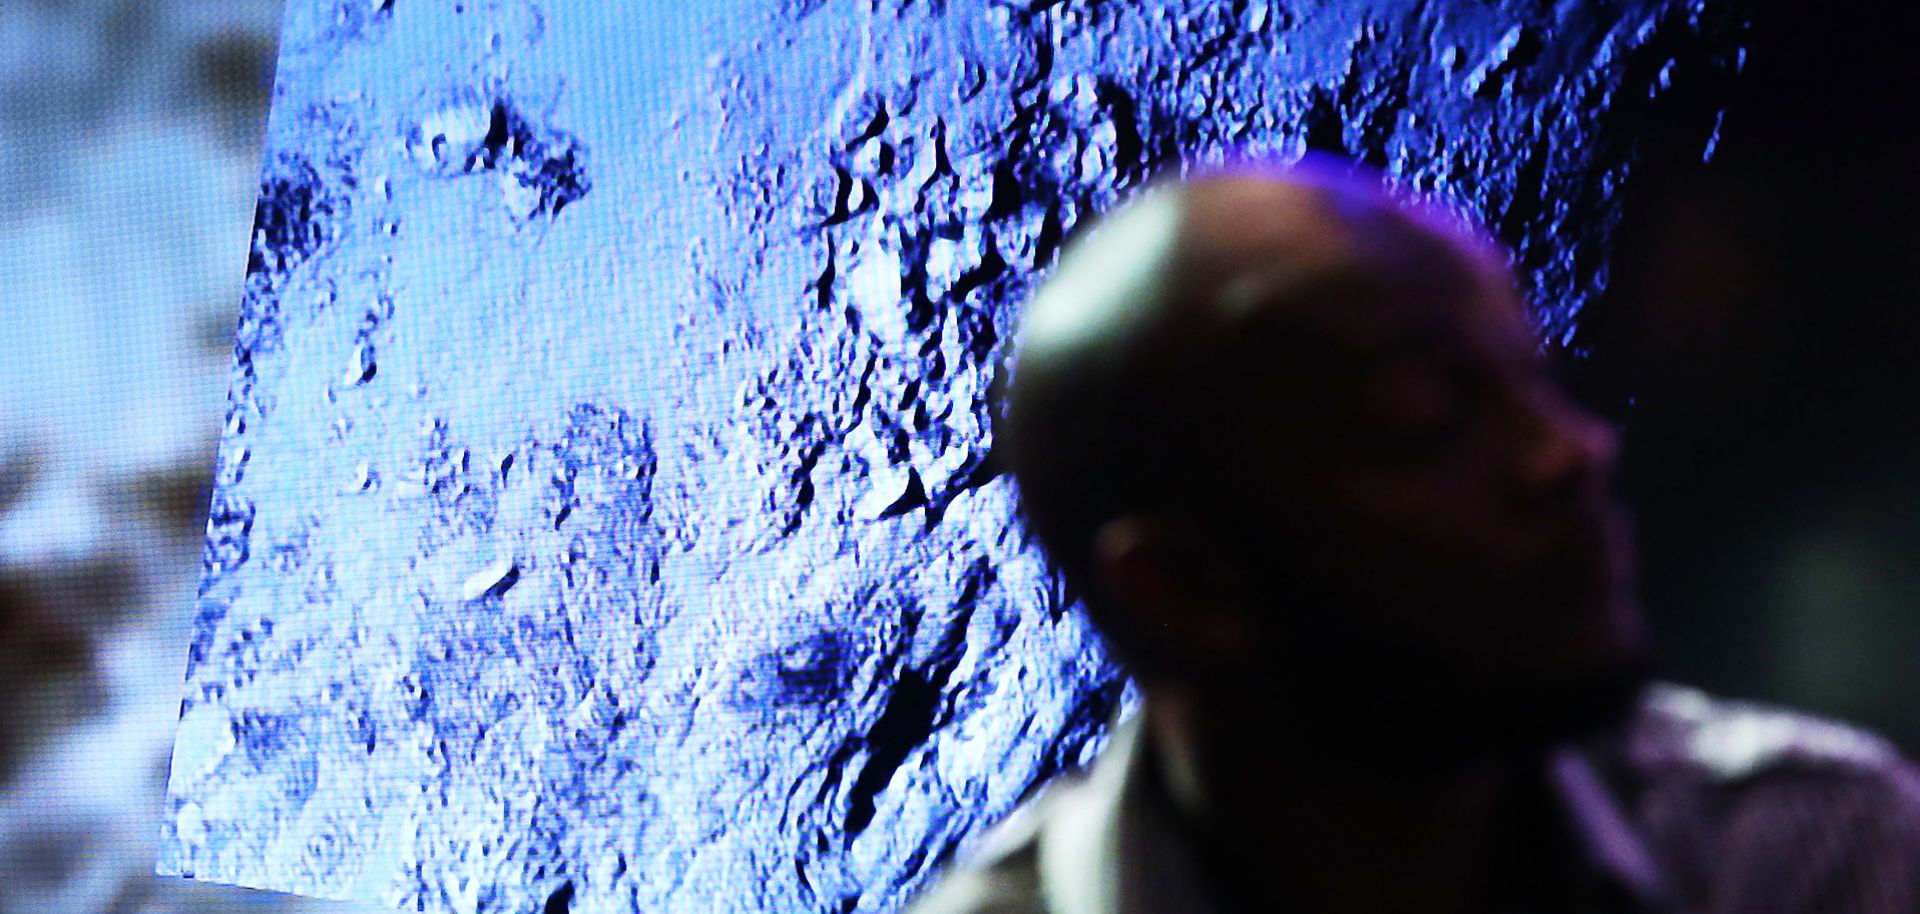 An image from the New Horizons spacecraft, which passed within 7,800 miles of Pluto July 14, is shown during a NASA news conference July 15.